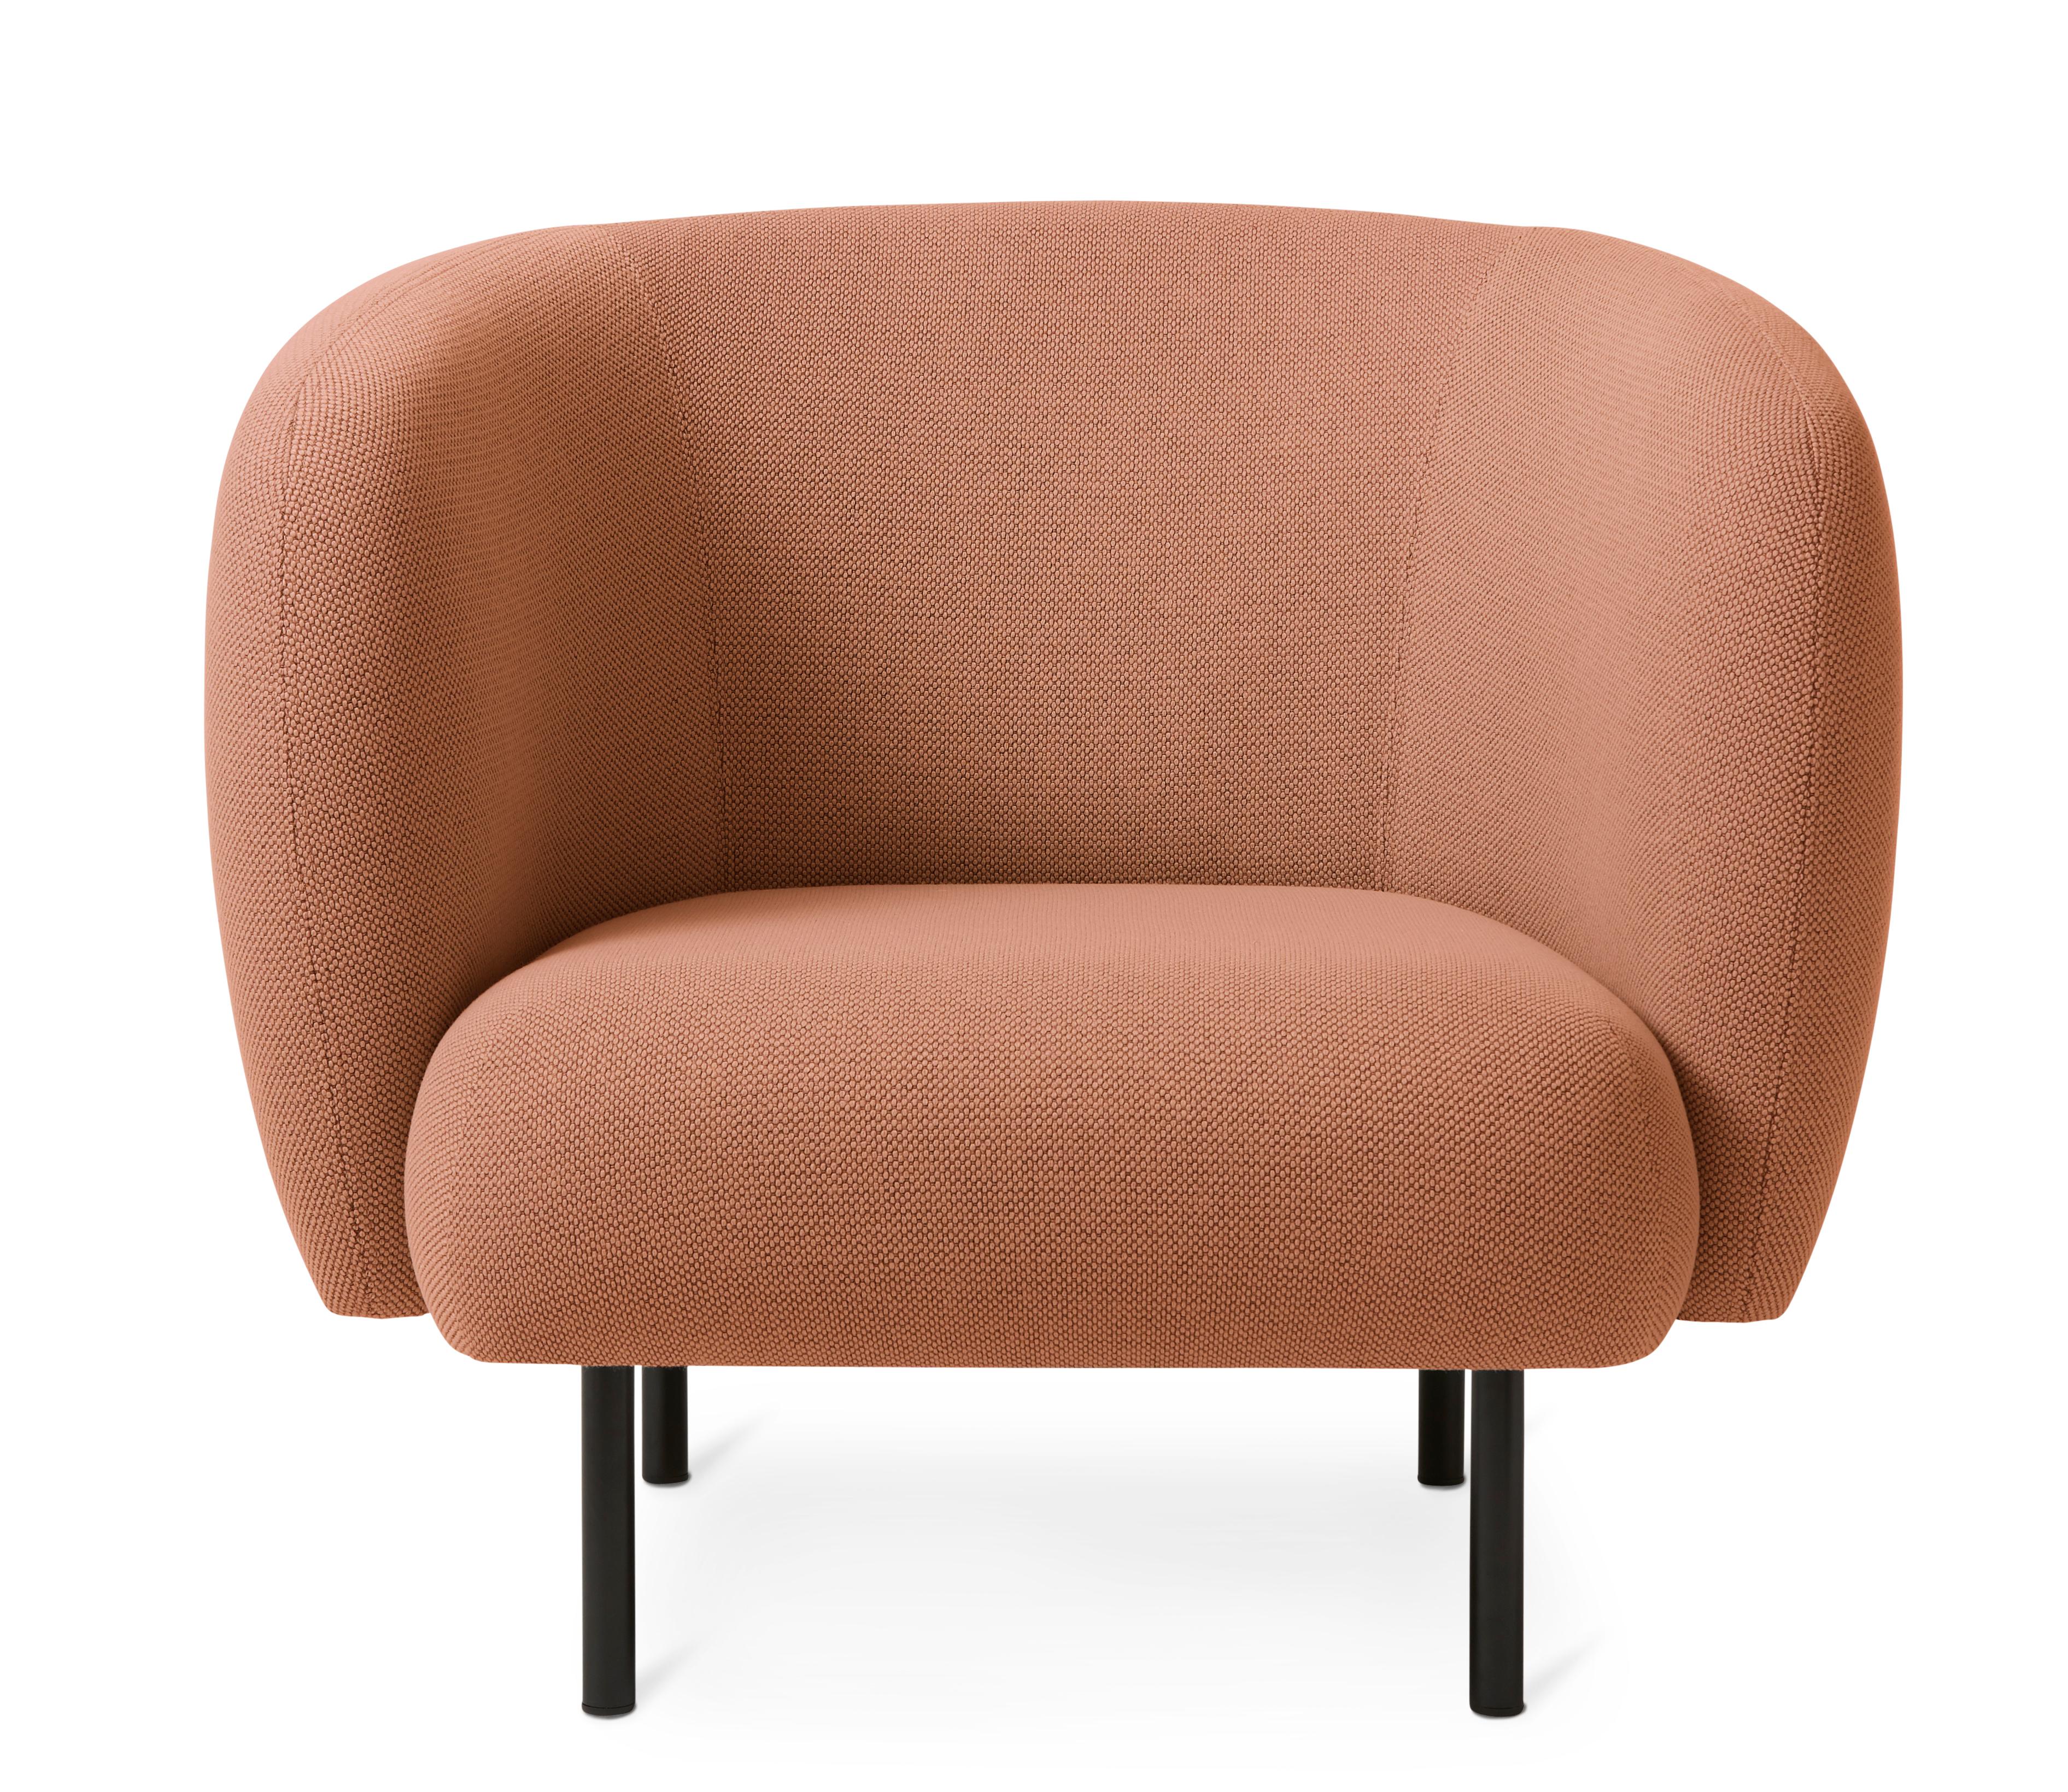 For Sale: Pink (Merit 035) Cape Lounge Chair, by Charlotte Høncke from Warm Nordic